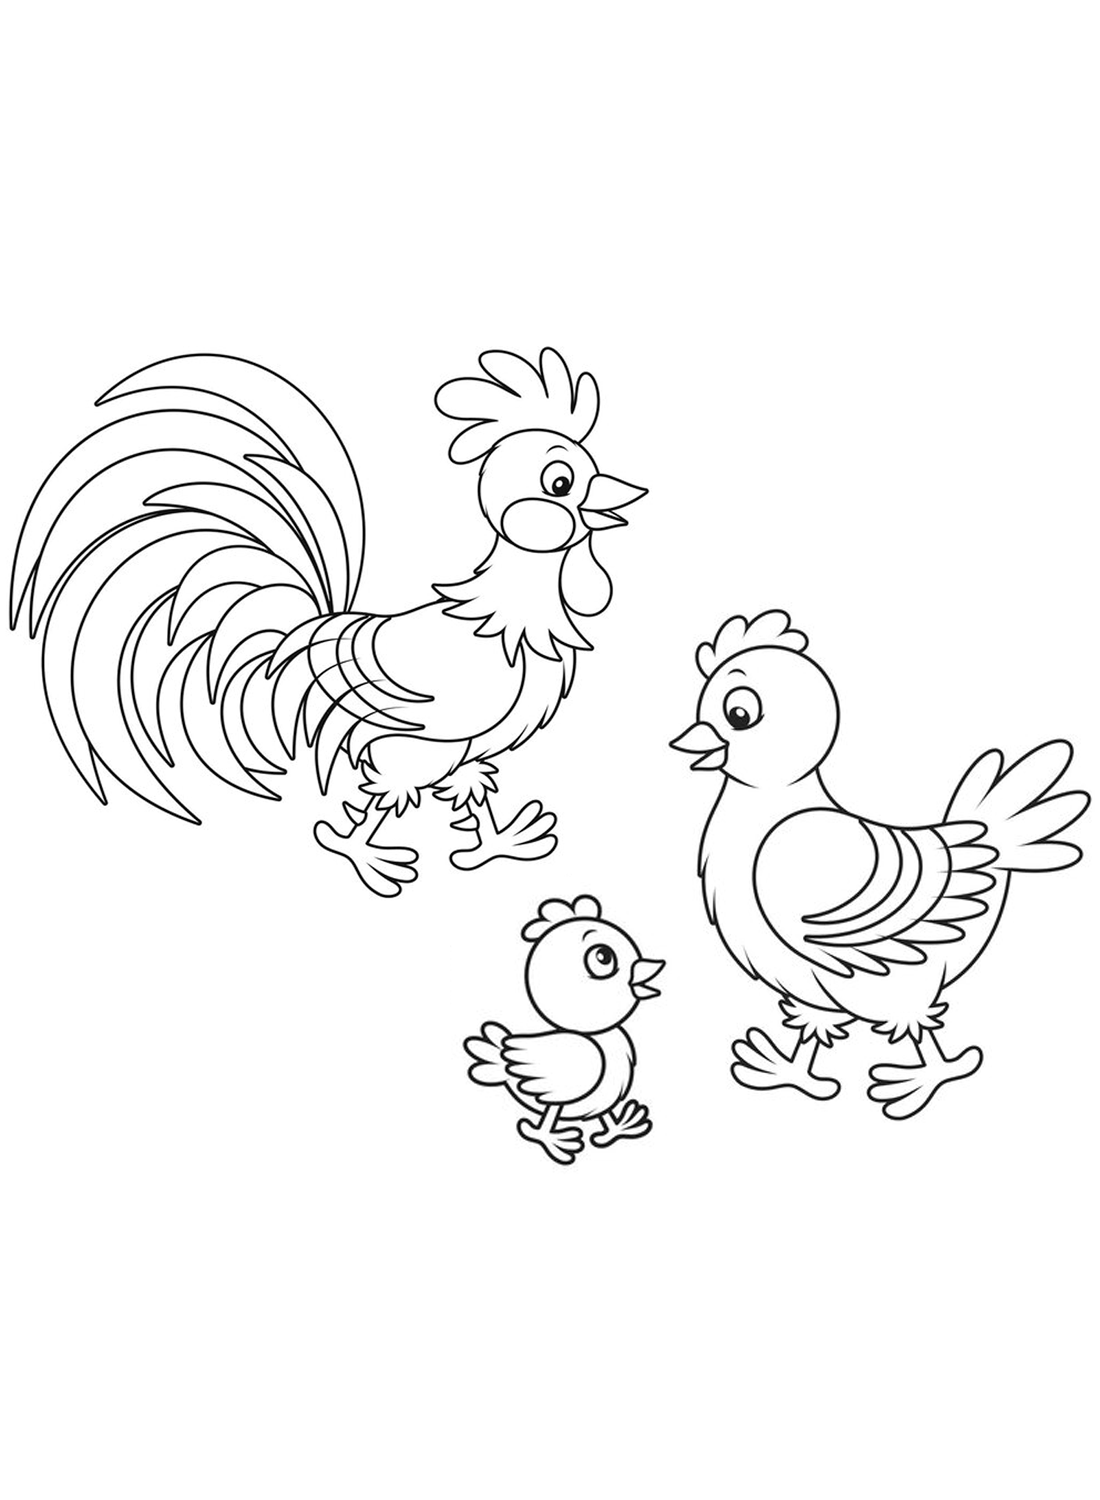 A rooster family Coloring Pages